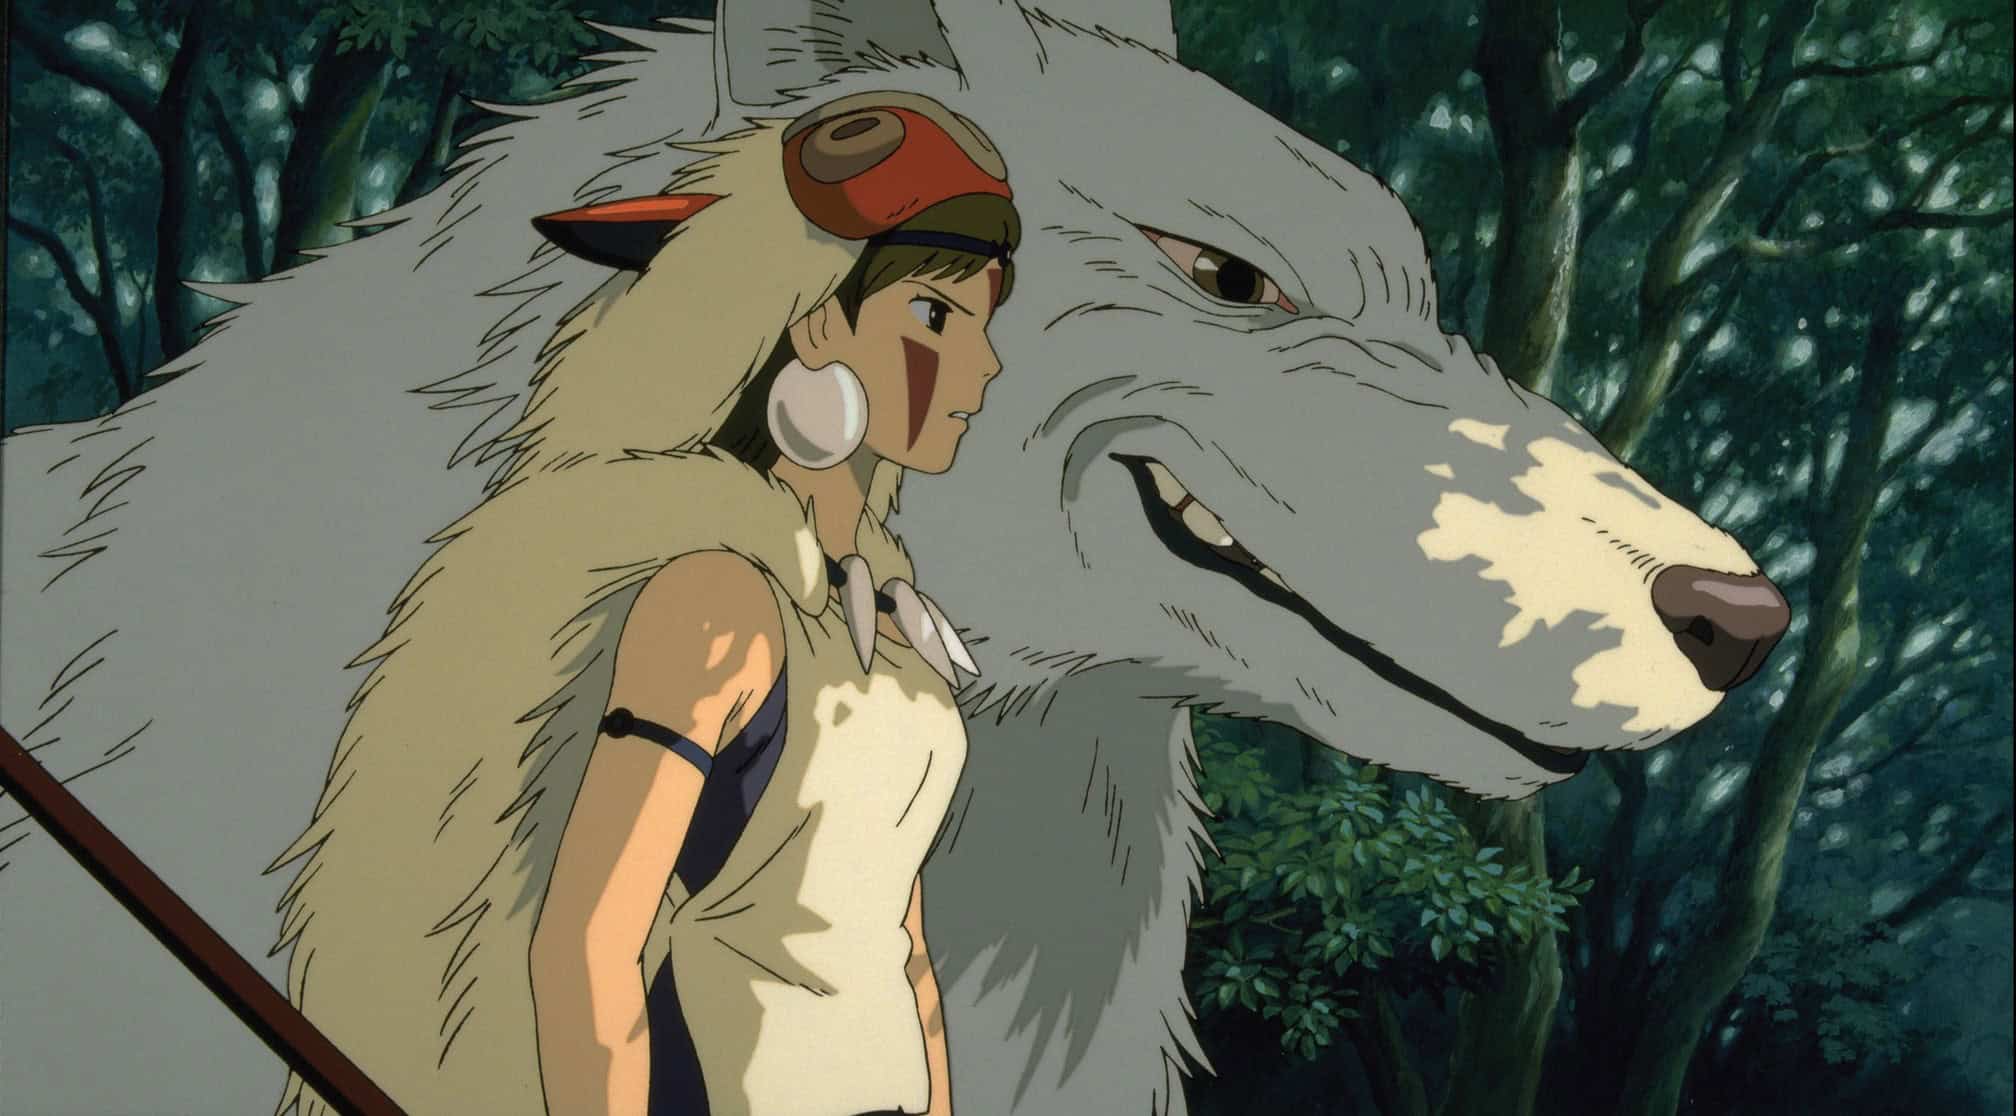 An animated girl in a headdress with a giant wolf in this image from Studio Ghibli.